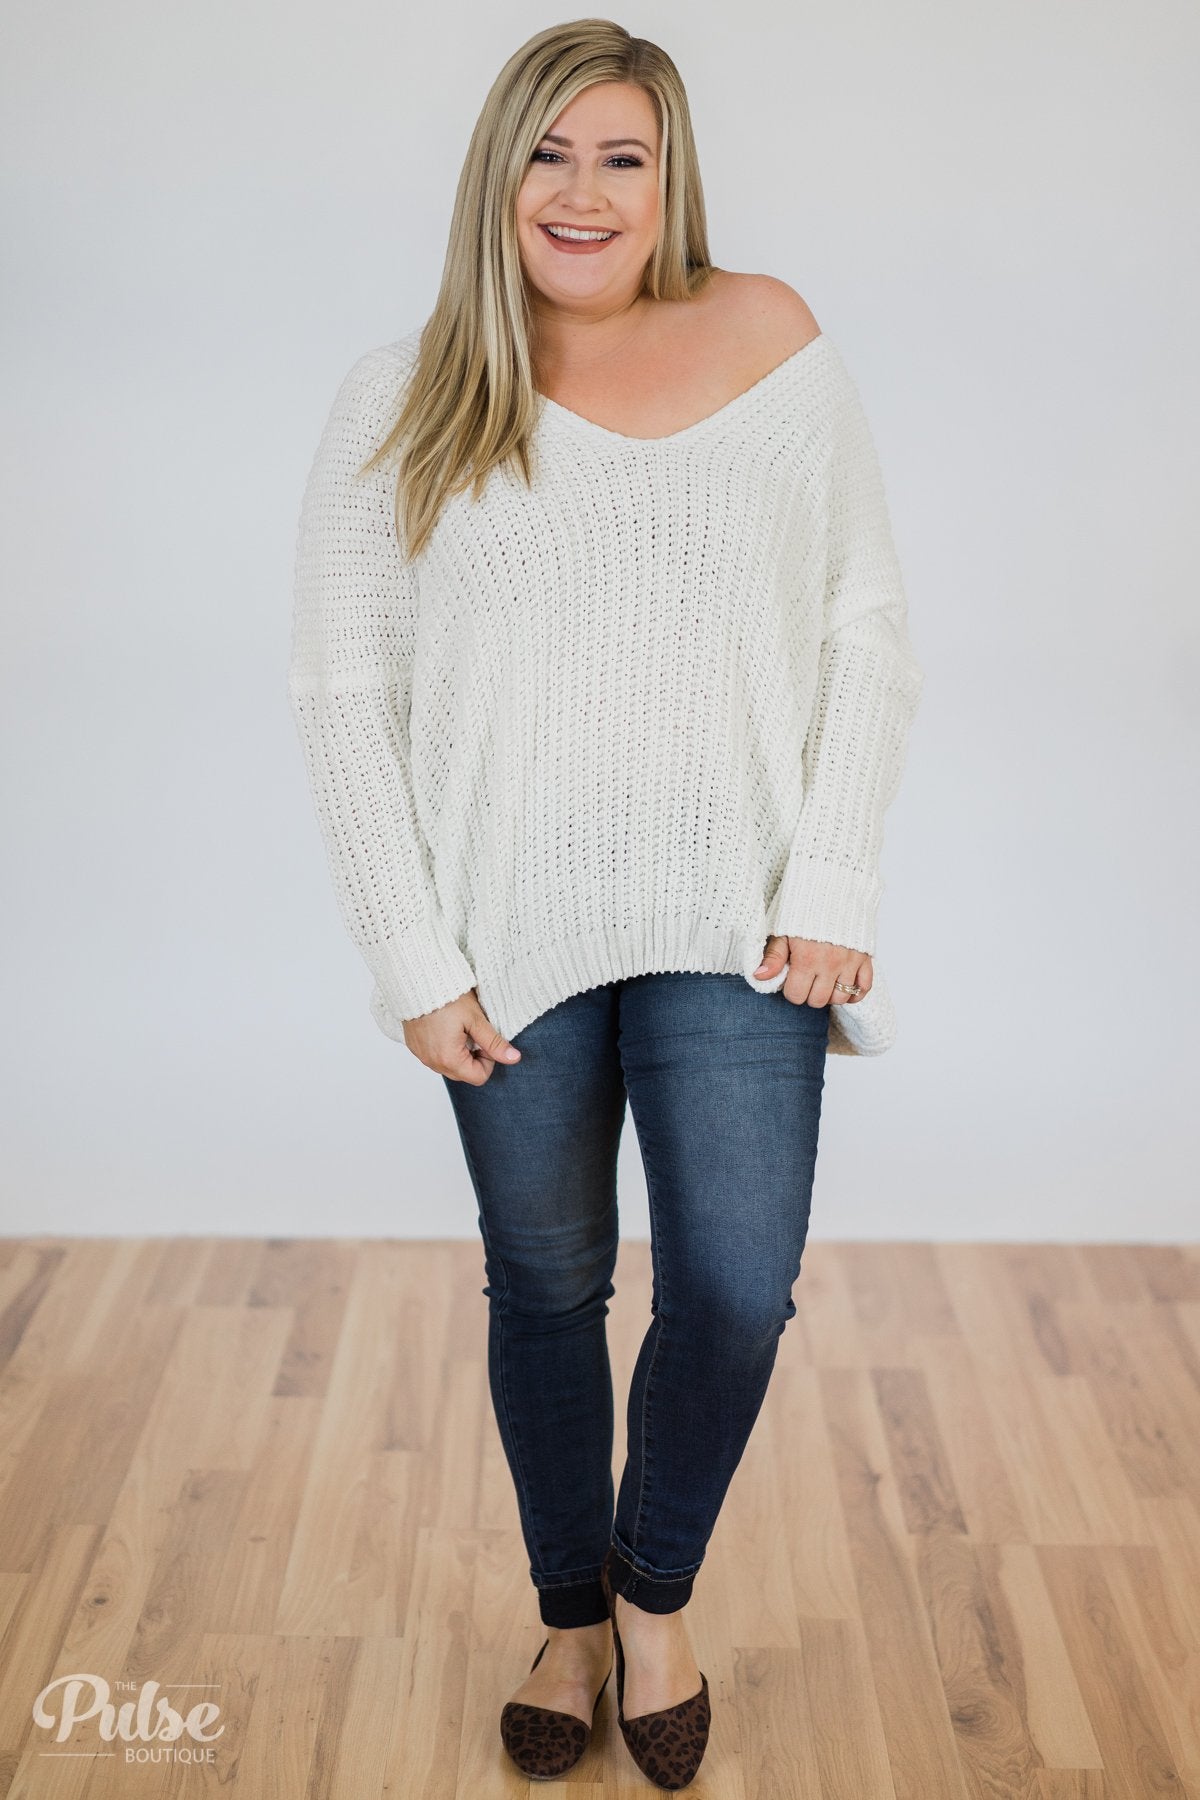 Softly Knitted Chunky Sweater- White – The Pulse Boutique